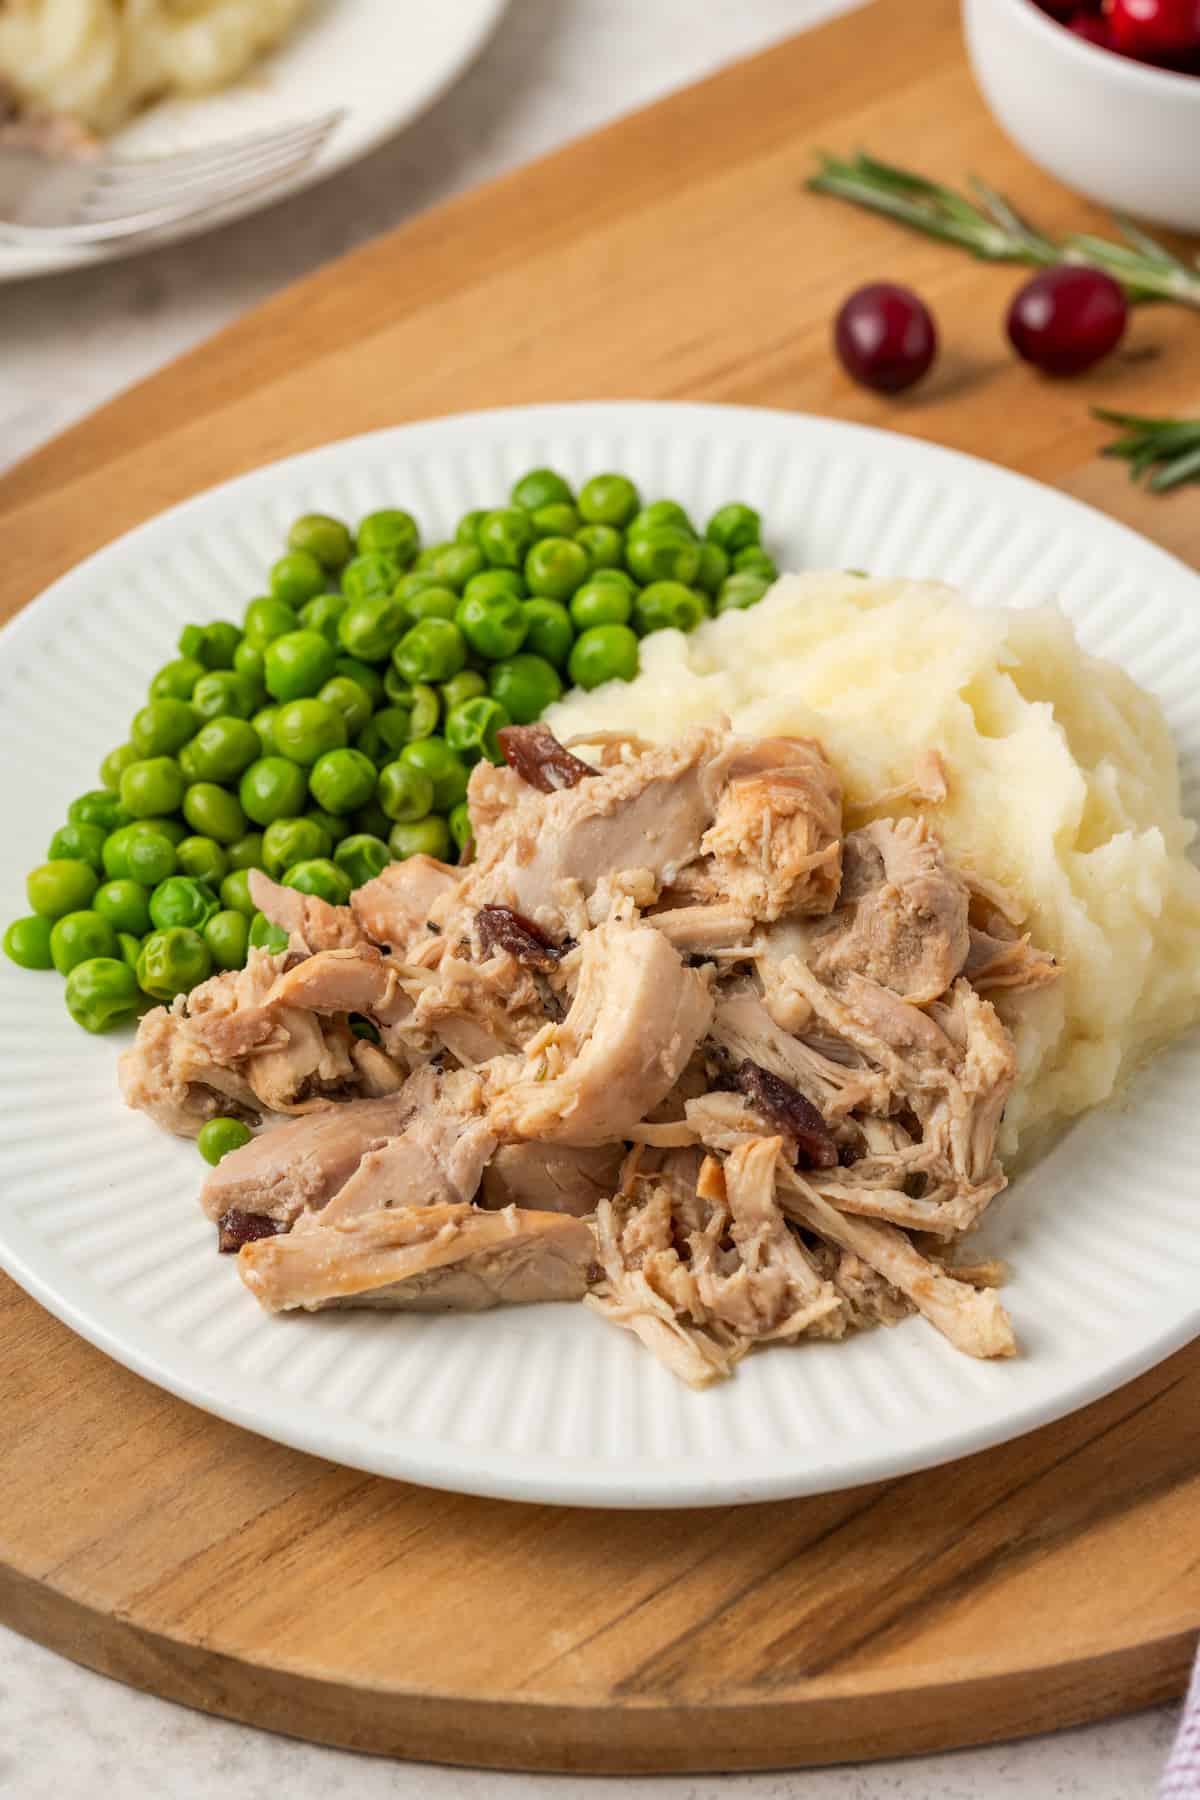 Cranberry Dijon chicken served alongside mashed potatoes and peas on a white dinner plate.